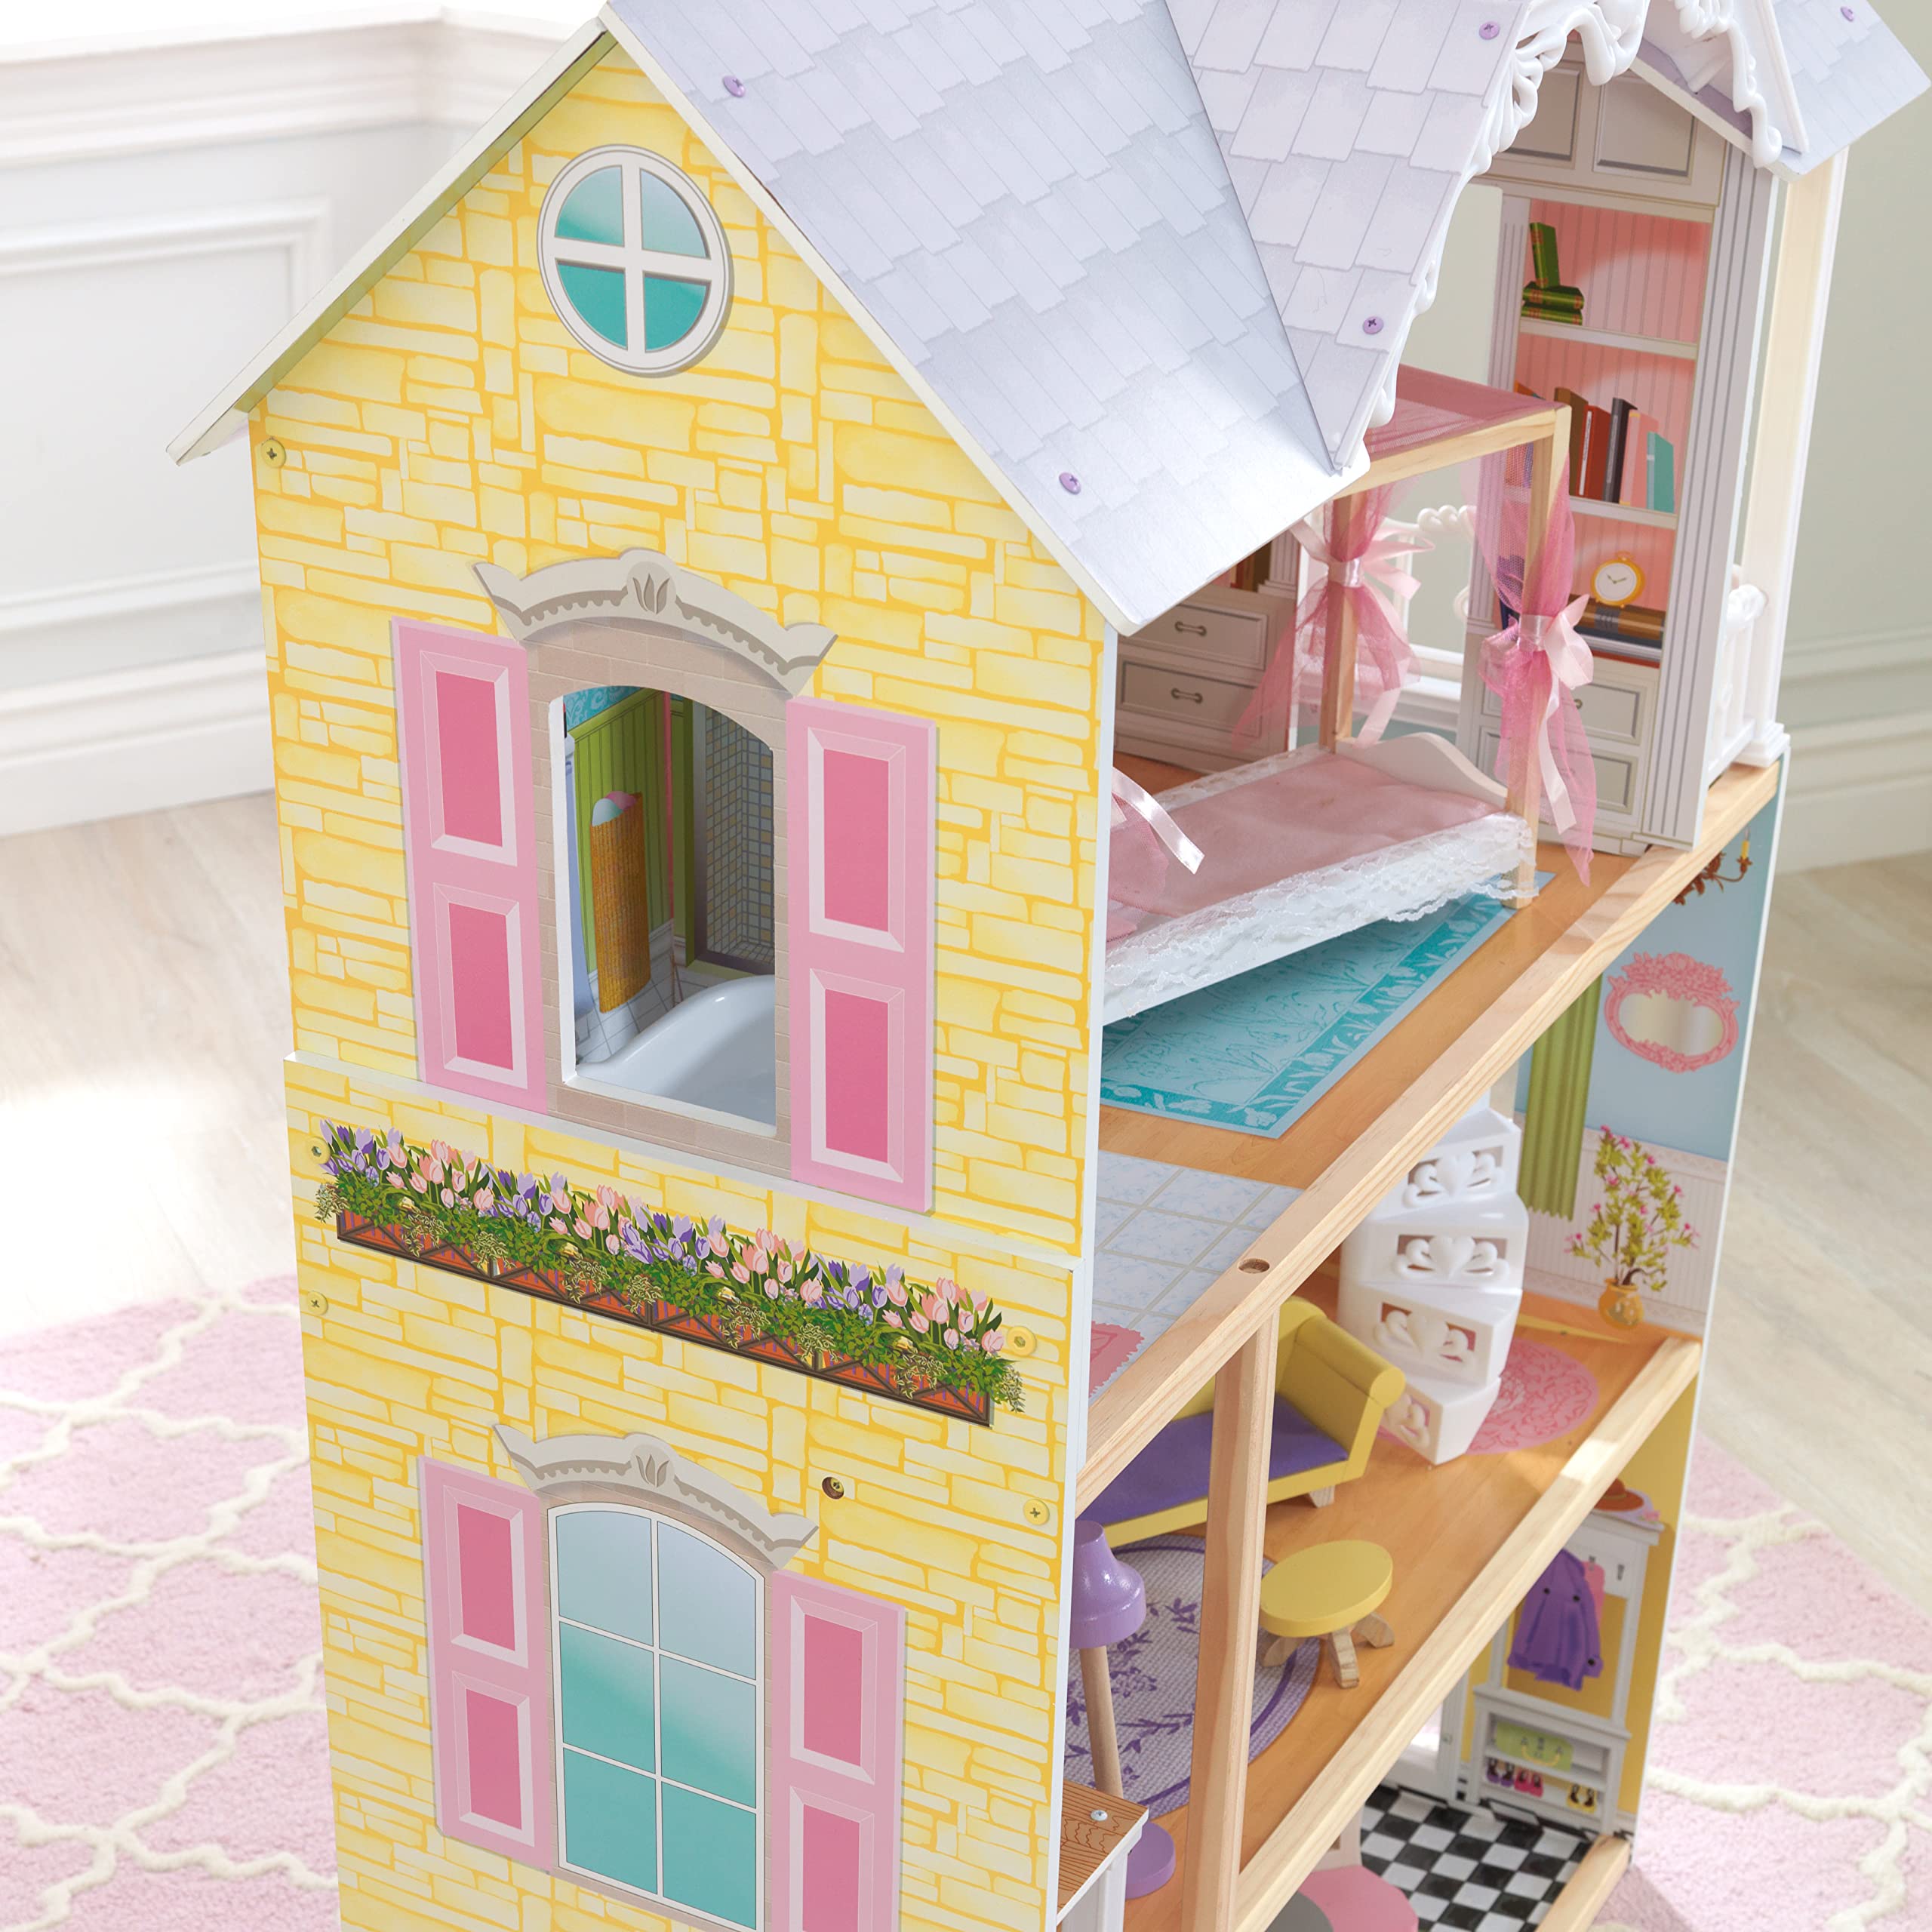 KidKraft Kaylee Wooden Dollhouse, Almost 4 Feet Tall with Elevator, Stairs and 10 Accessories, Gift for Ages 3+